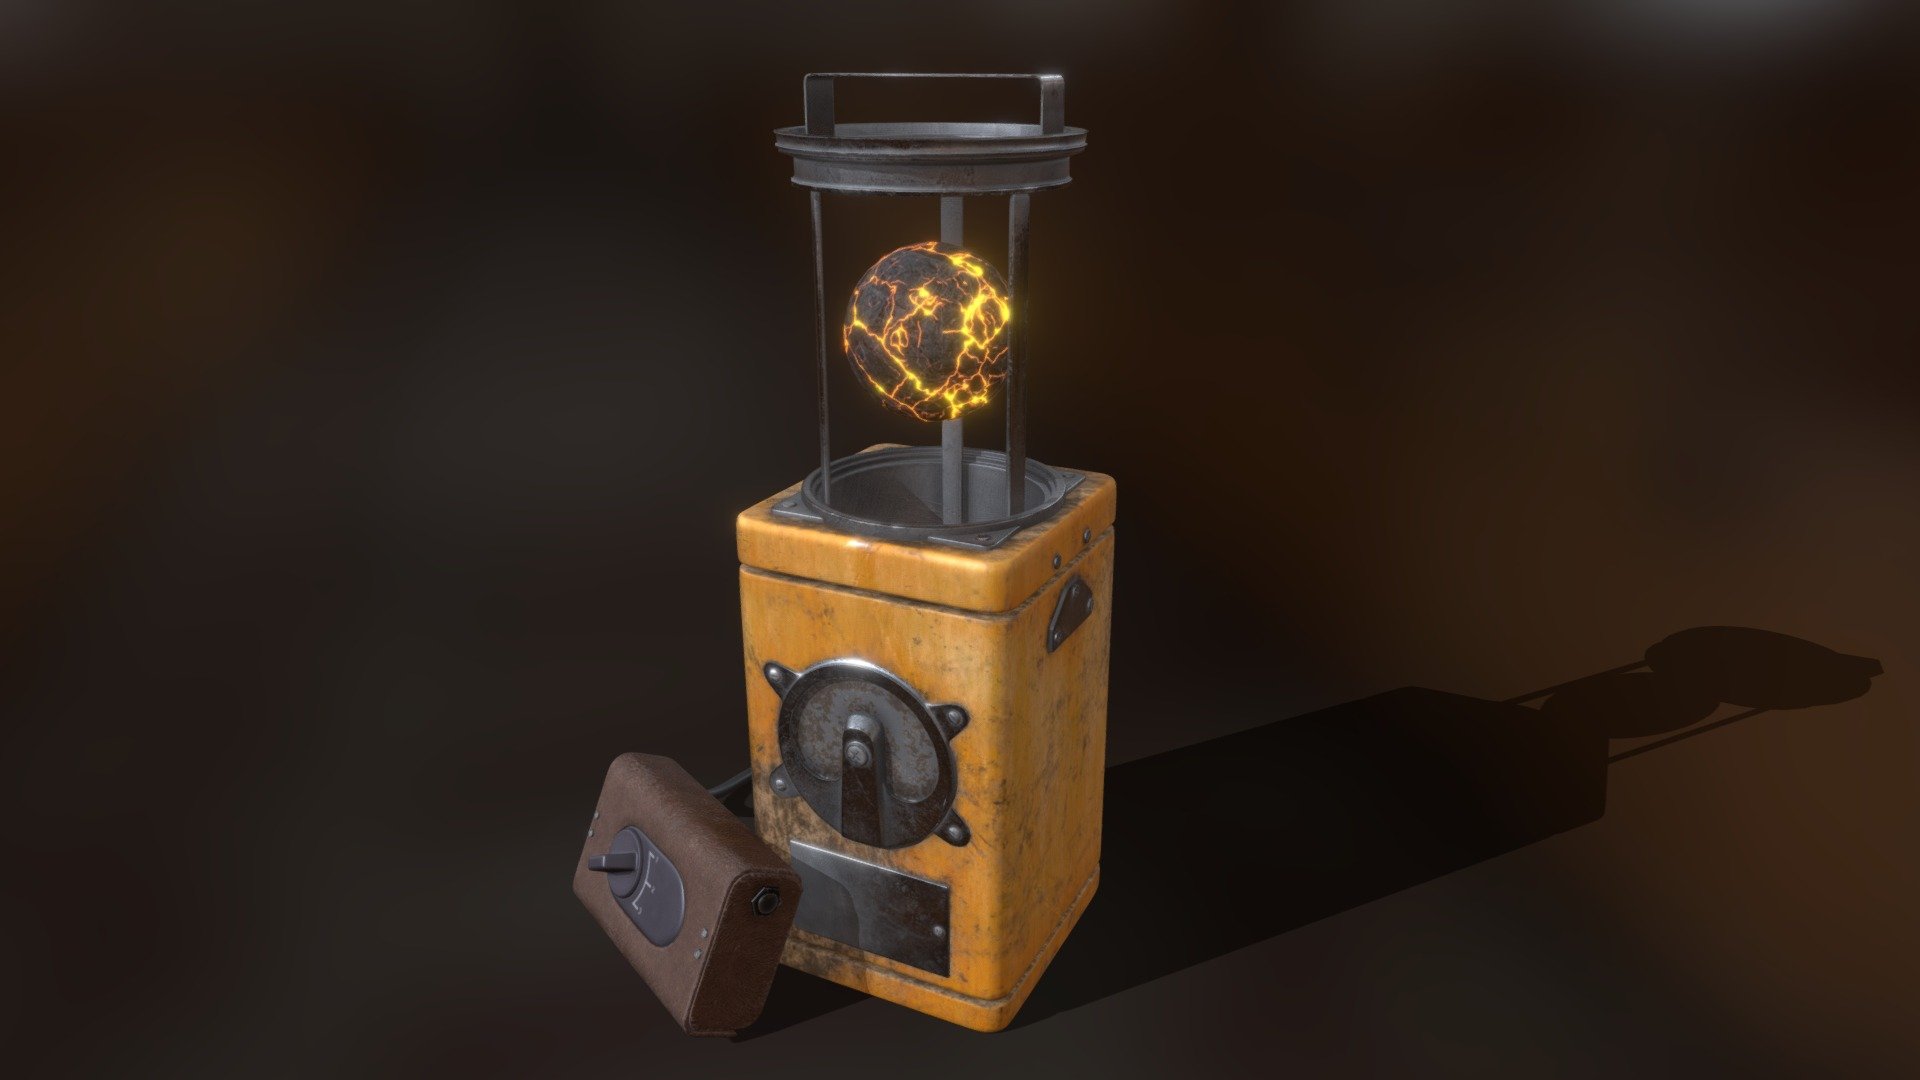 Stalker 2 Artifact Container Lamp from the offer of pre-order of the S.T.A.L.K.E.R. 2

GET model here: http://surl.li/blovf

This is a lamp that will be given to everyone who made the most expensive pre-order of the stalker. This is a container for one of the artifacts from the stalker. I tried to make it as similar as possible to the picture, but it may differ from the final edition, because there is very little information

You can watch the creation process on my channel (link to video): https://www.youtube.com/watch?v=pvSekweiNWw&amp;t=11s&amp;ab_channel=AMONG - Stalker 2 Artifact Container Lamp - 3D model by AmongModels 3d model